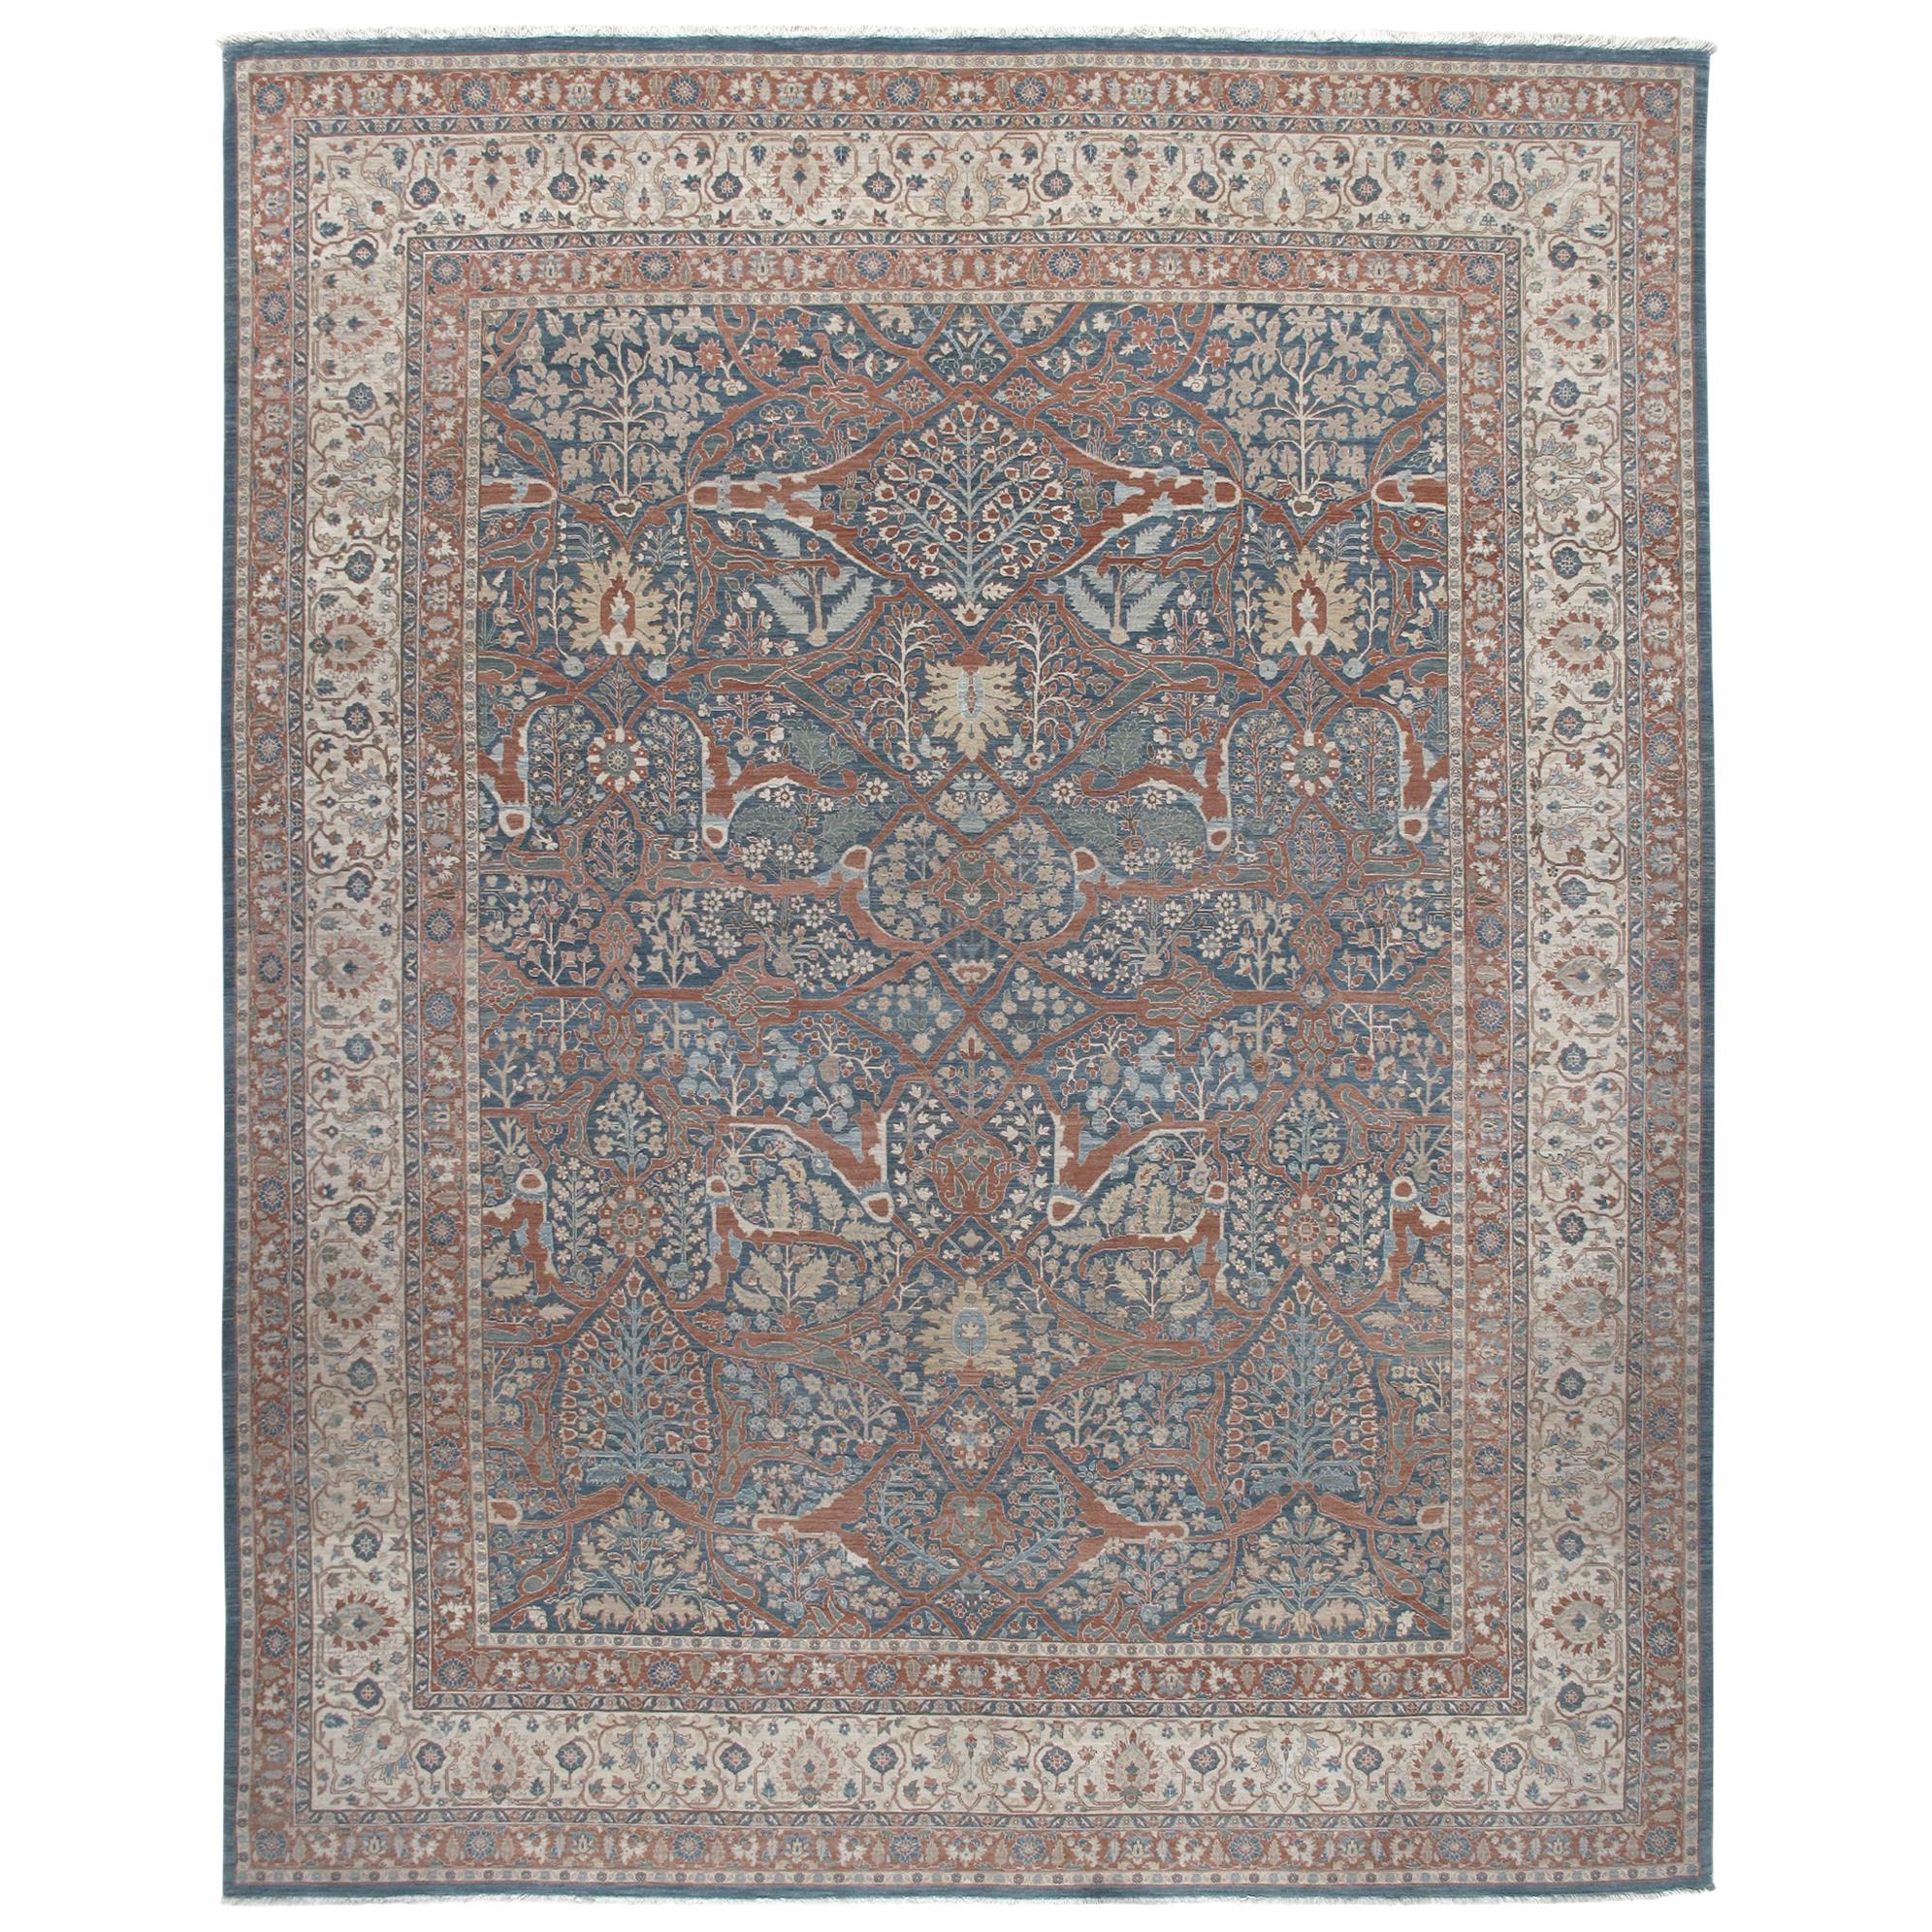 Persian Notable Tabriz Handknotted Rug in Navy, Rust and Ivory Color